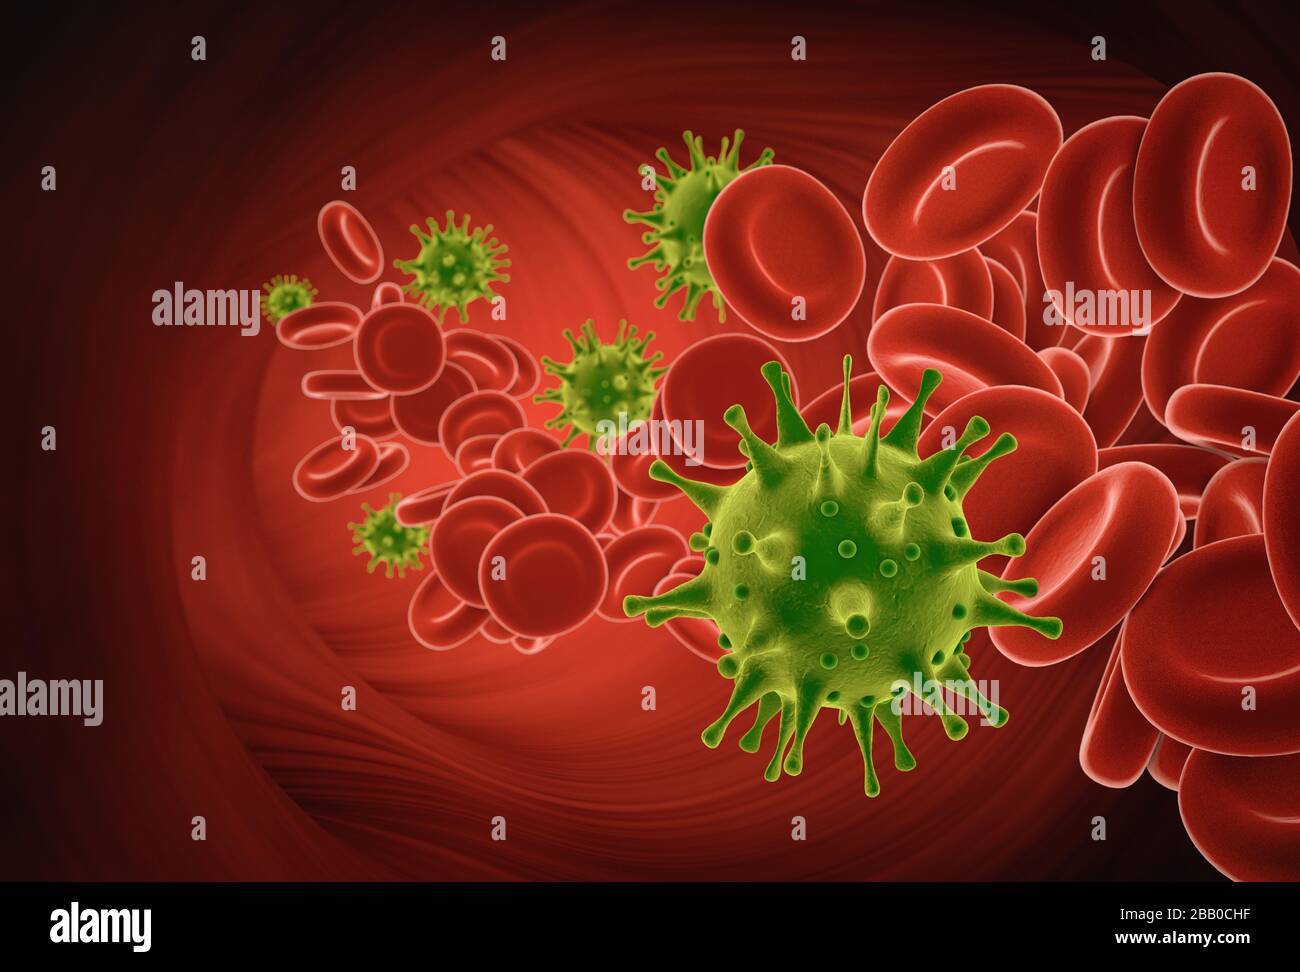 COVID-19 viruses moving with red blood cells inside vein as 3d render. Coronavirus influenza background. Pandemic medical health risk concept. Stock Photo